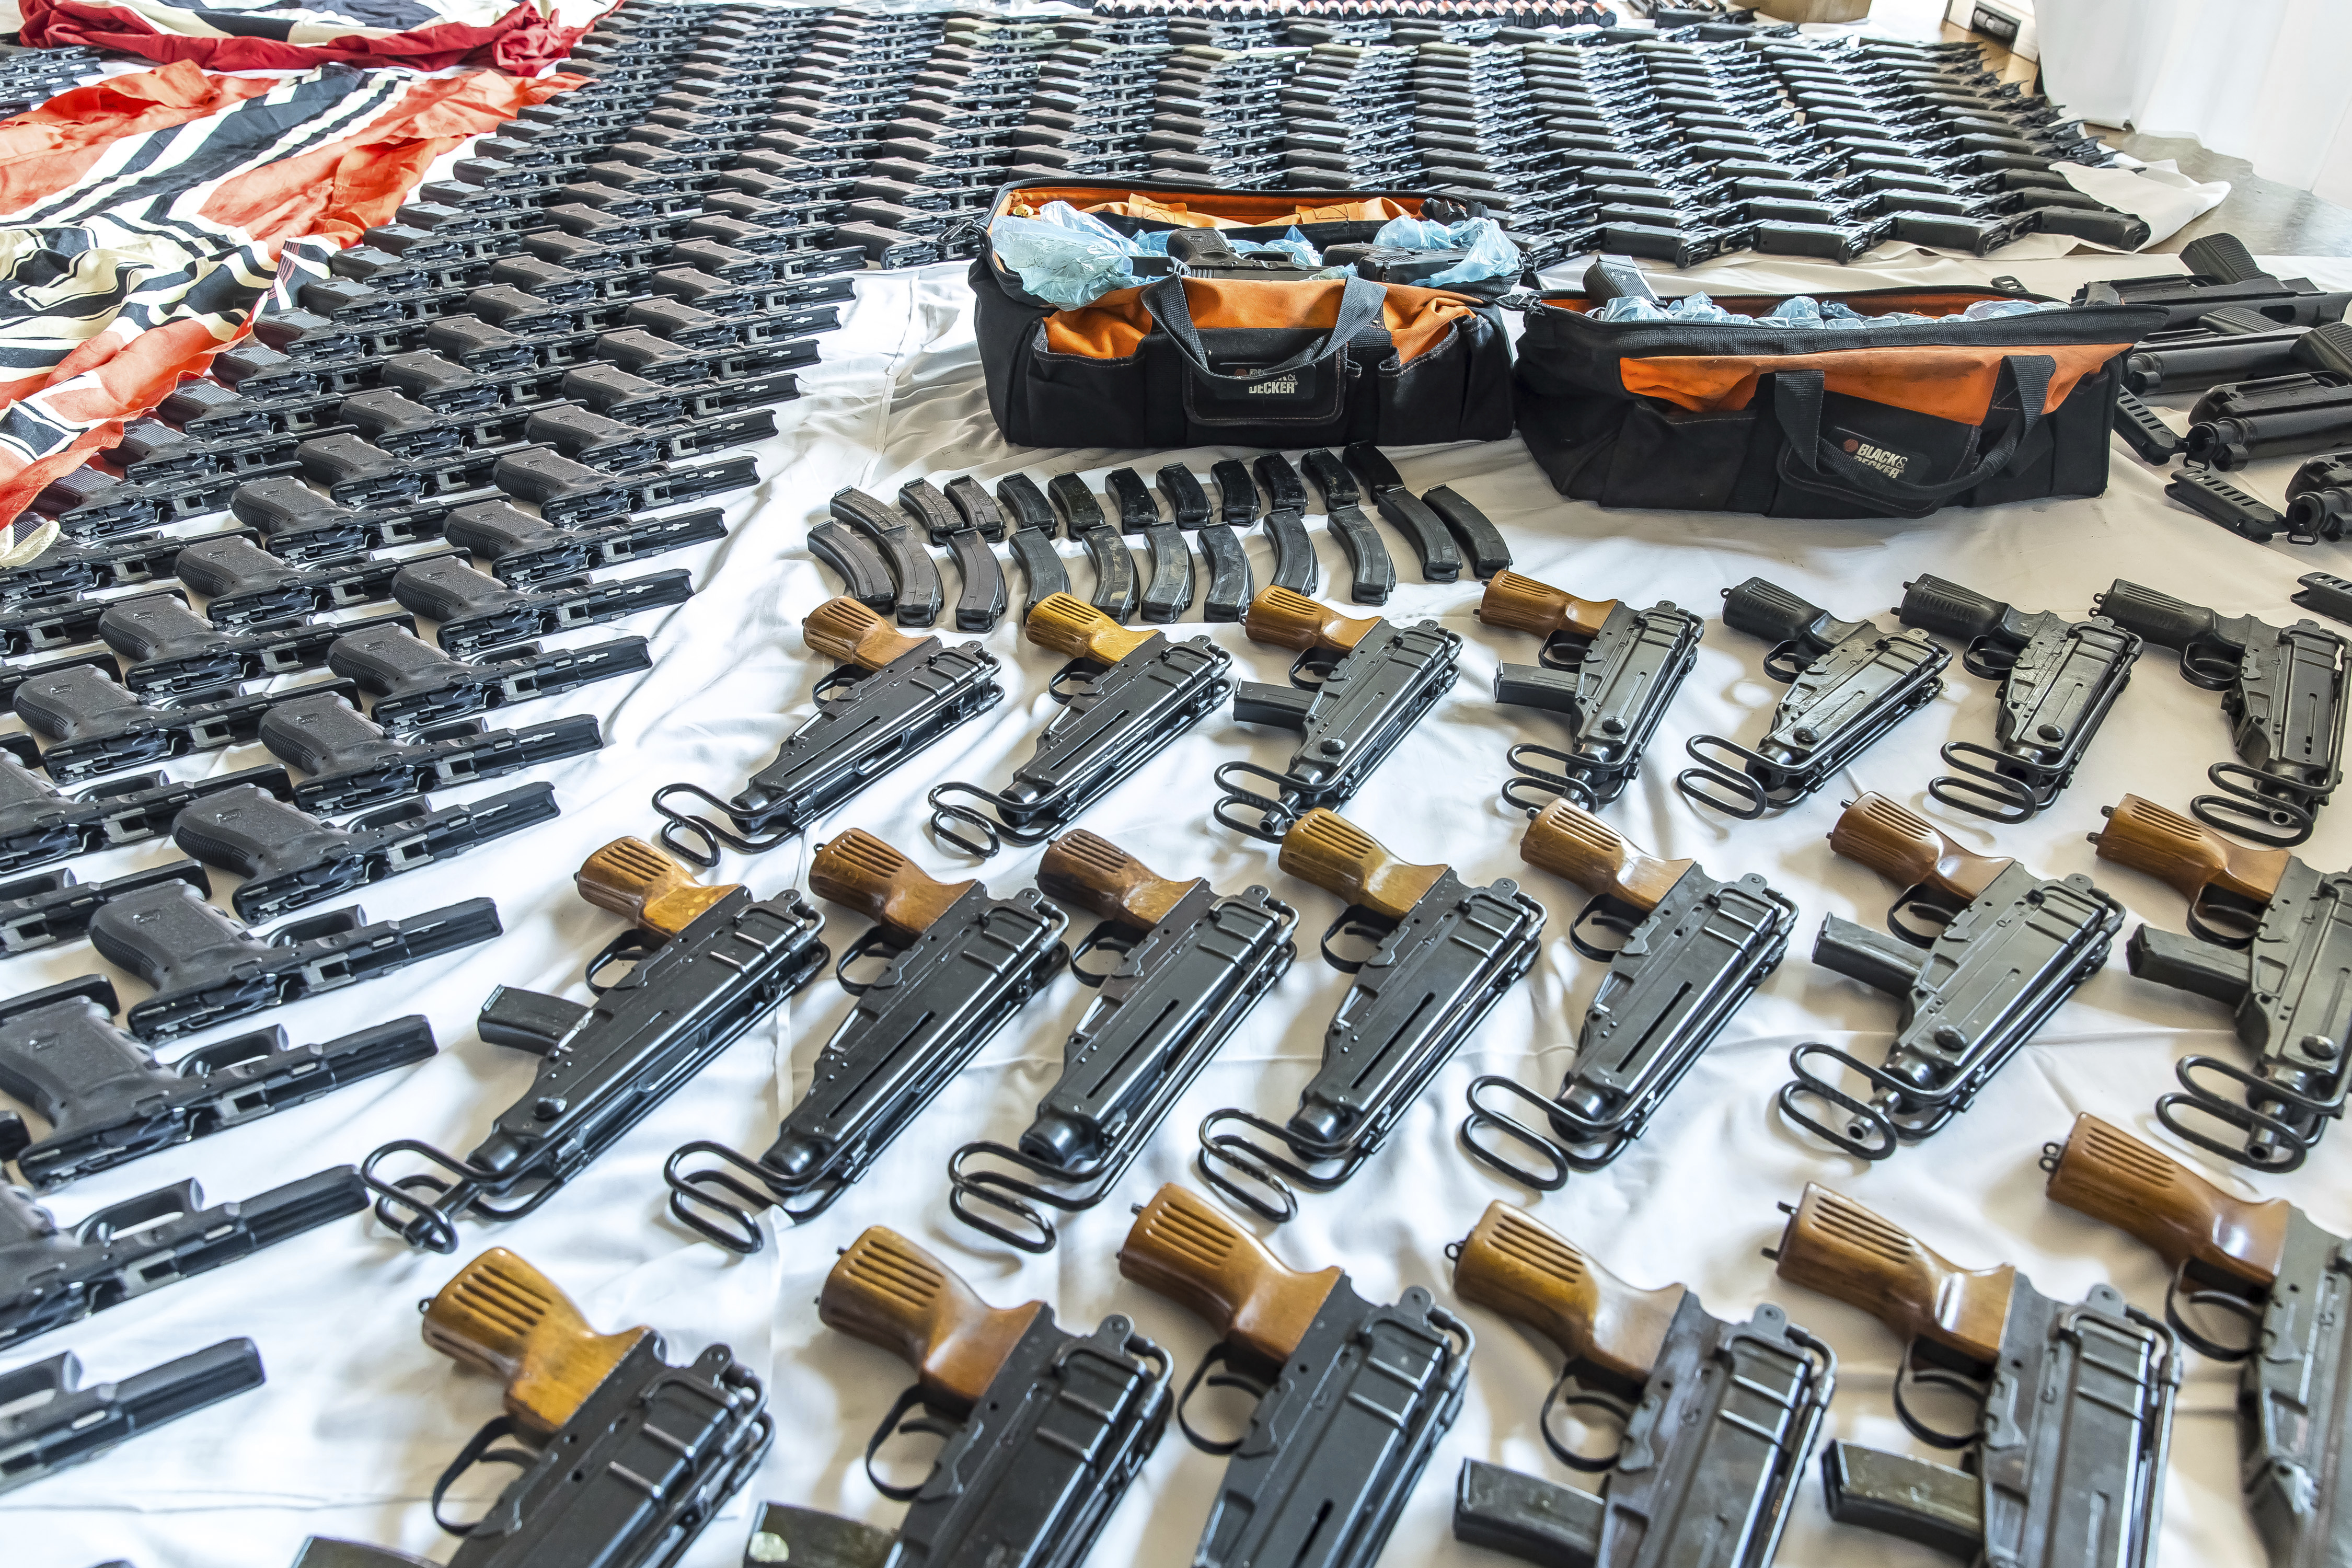 Austrian police seize drugs and vast trove of weapons in a raid on a far-right biker gang